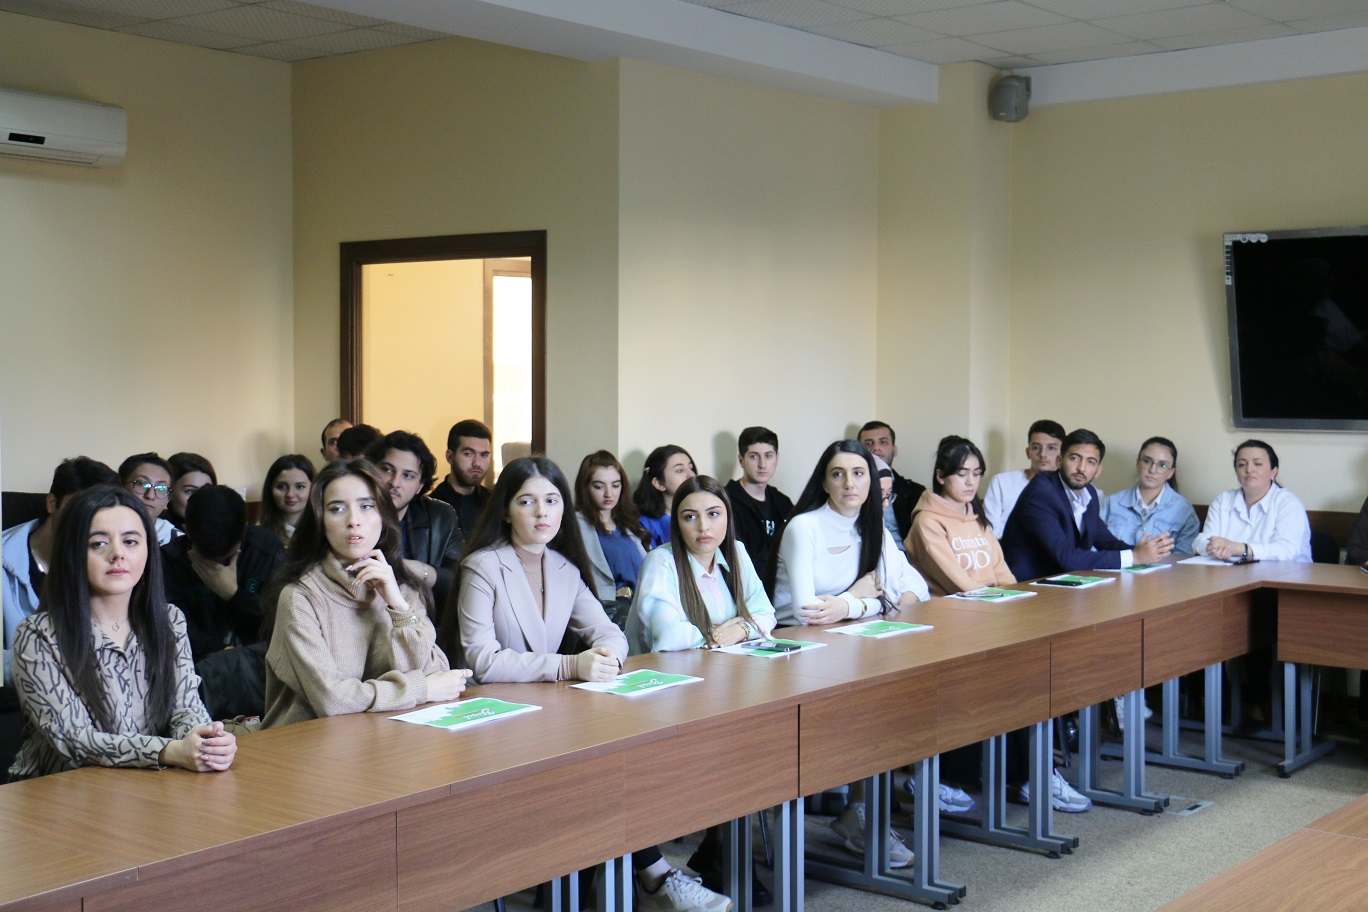 The presentation of the book "Green Economy" was held at AUAC